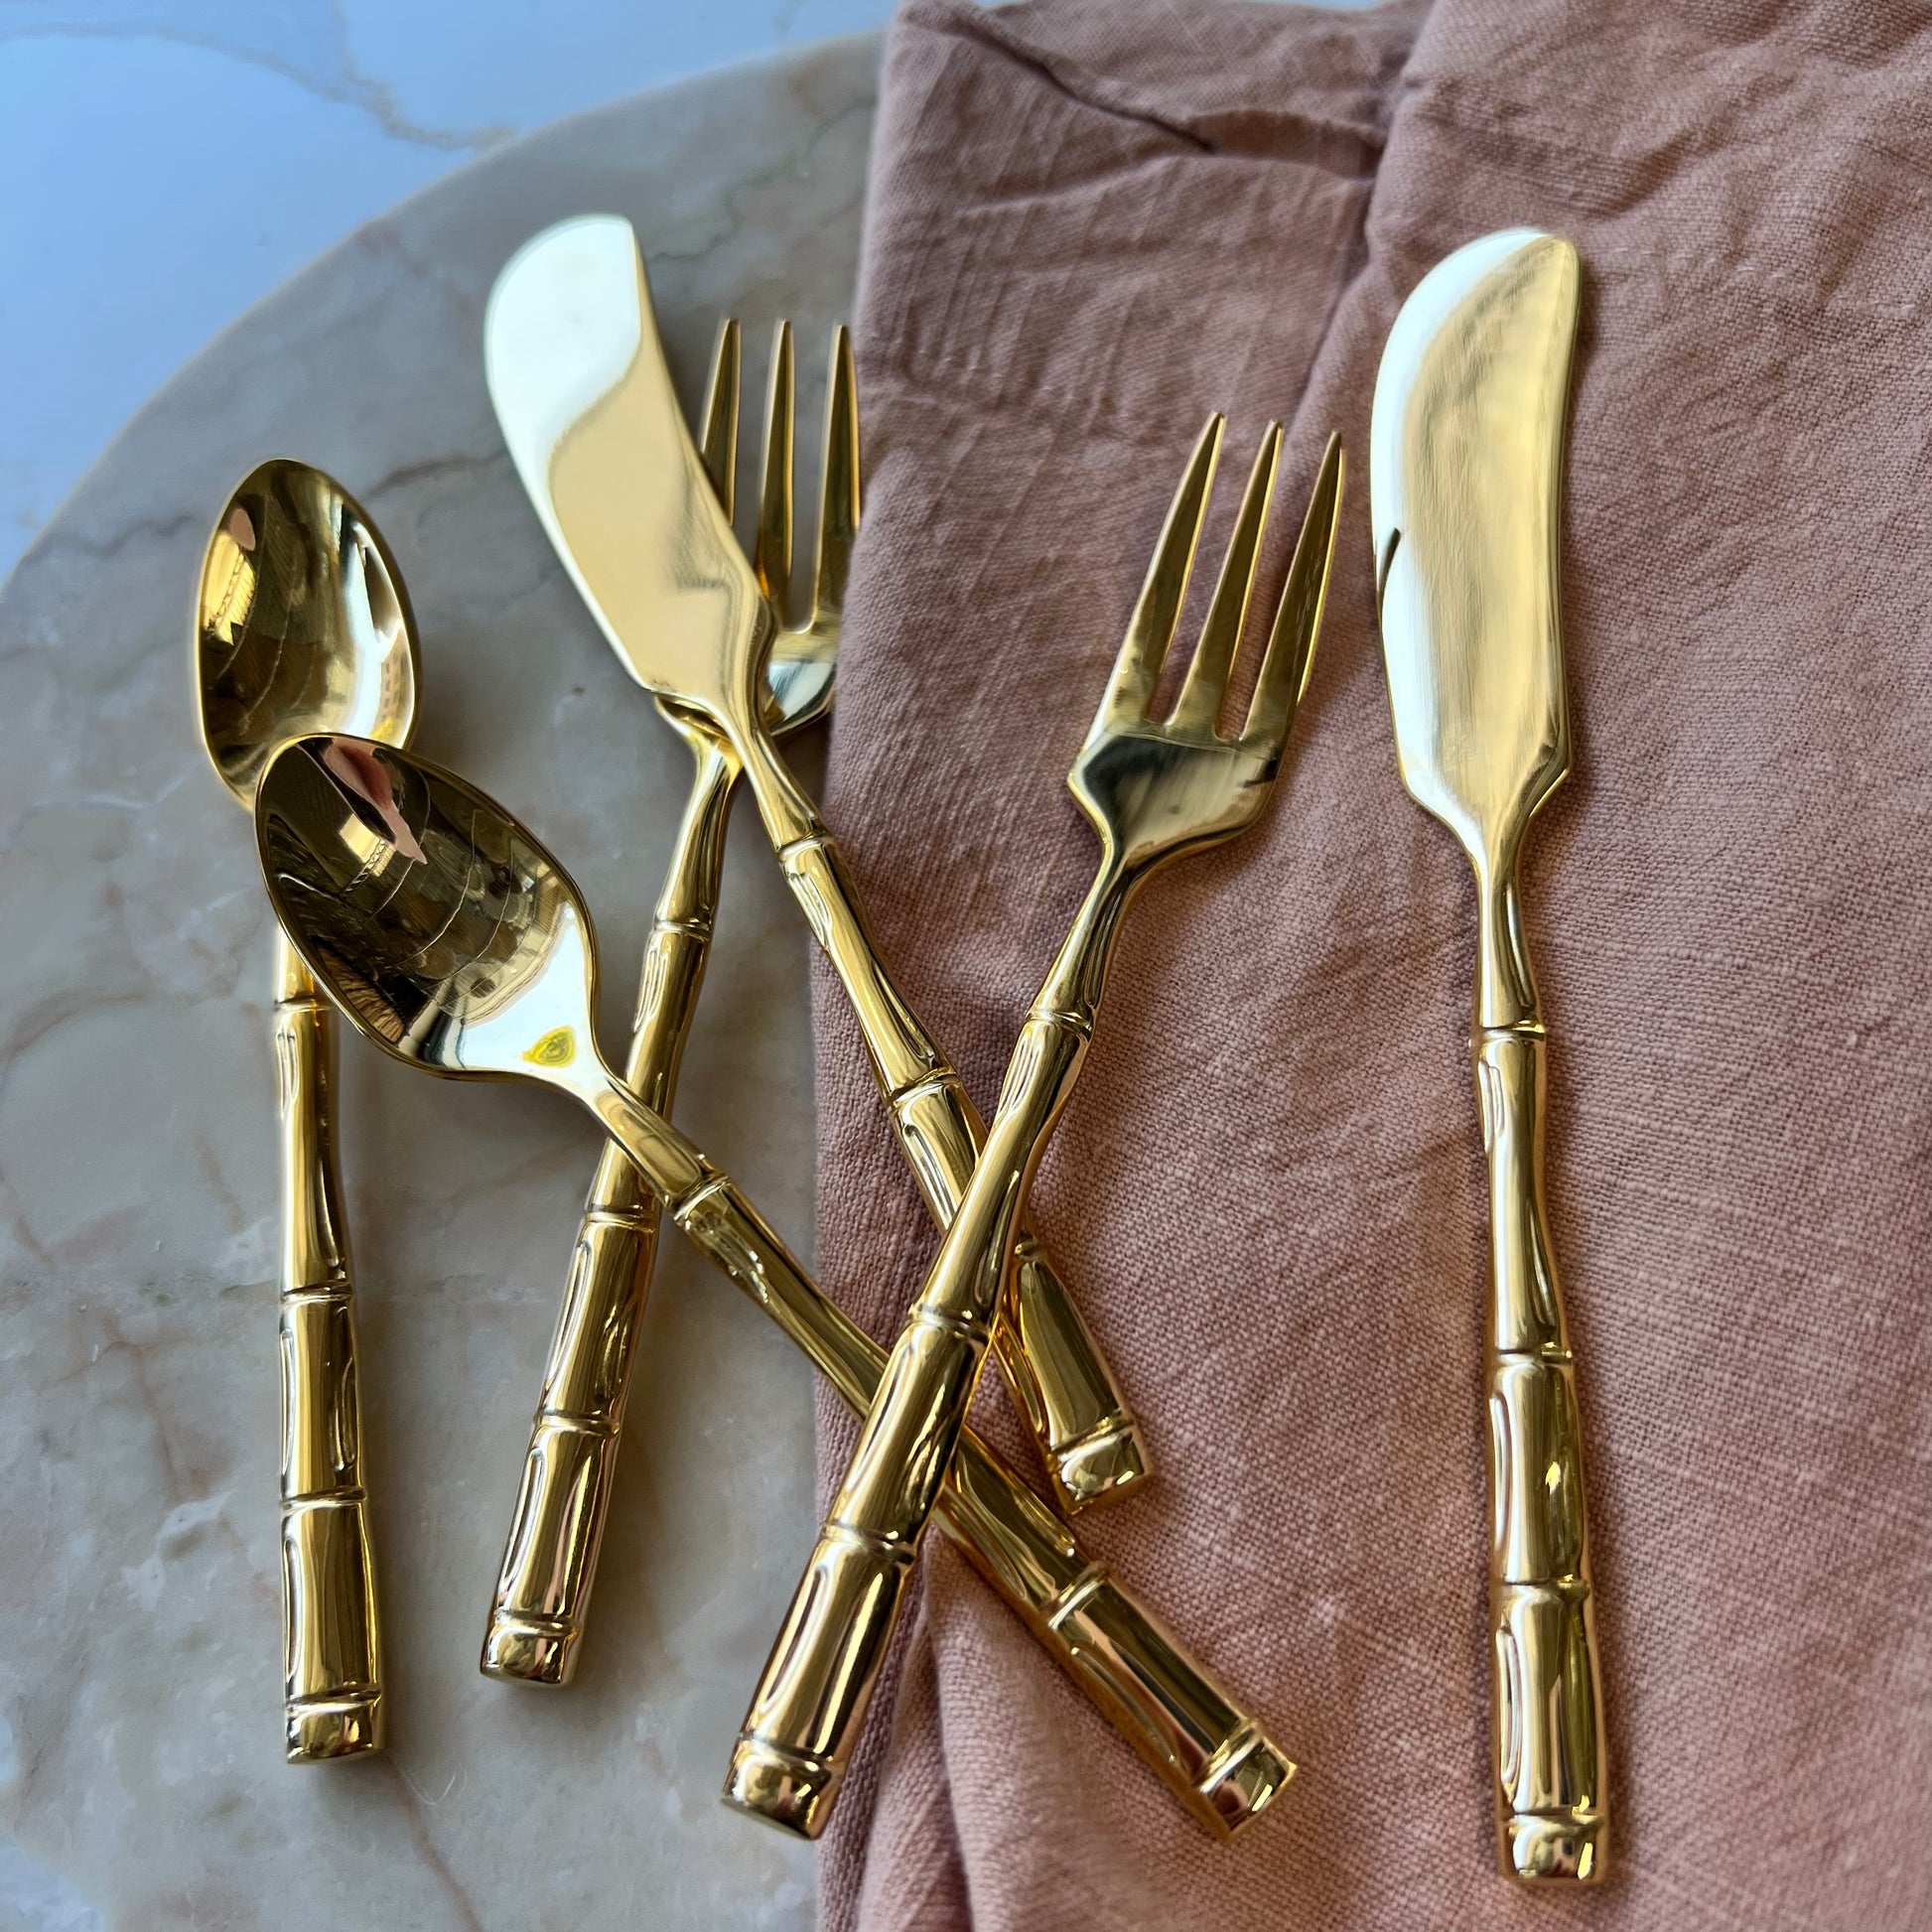 small gold sliver-ware with bamboo-style handles arranged on a marble board with a blush napkins.